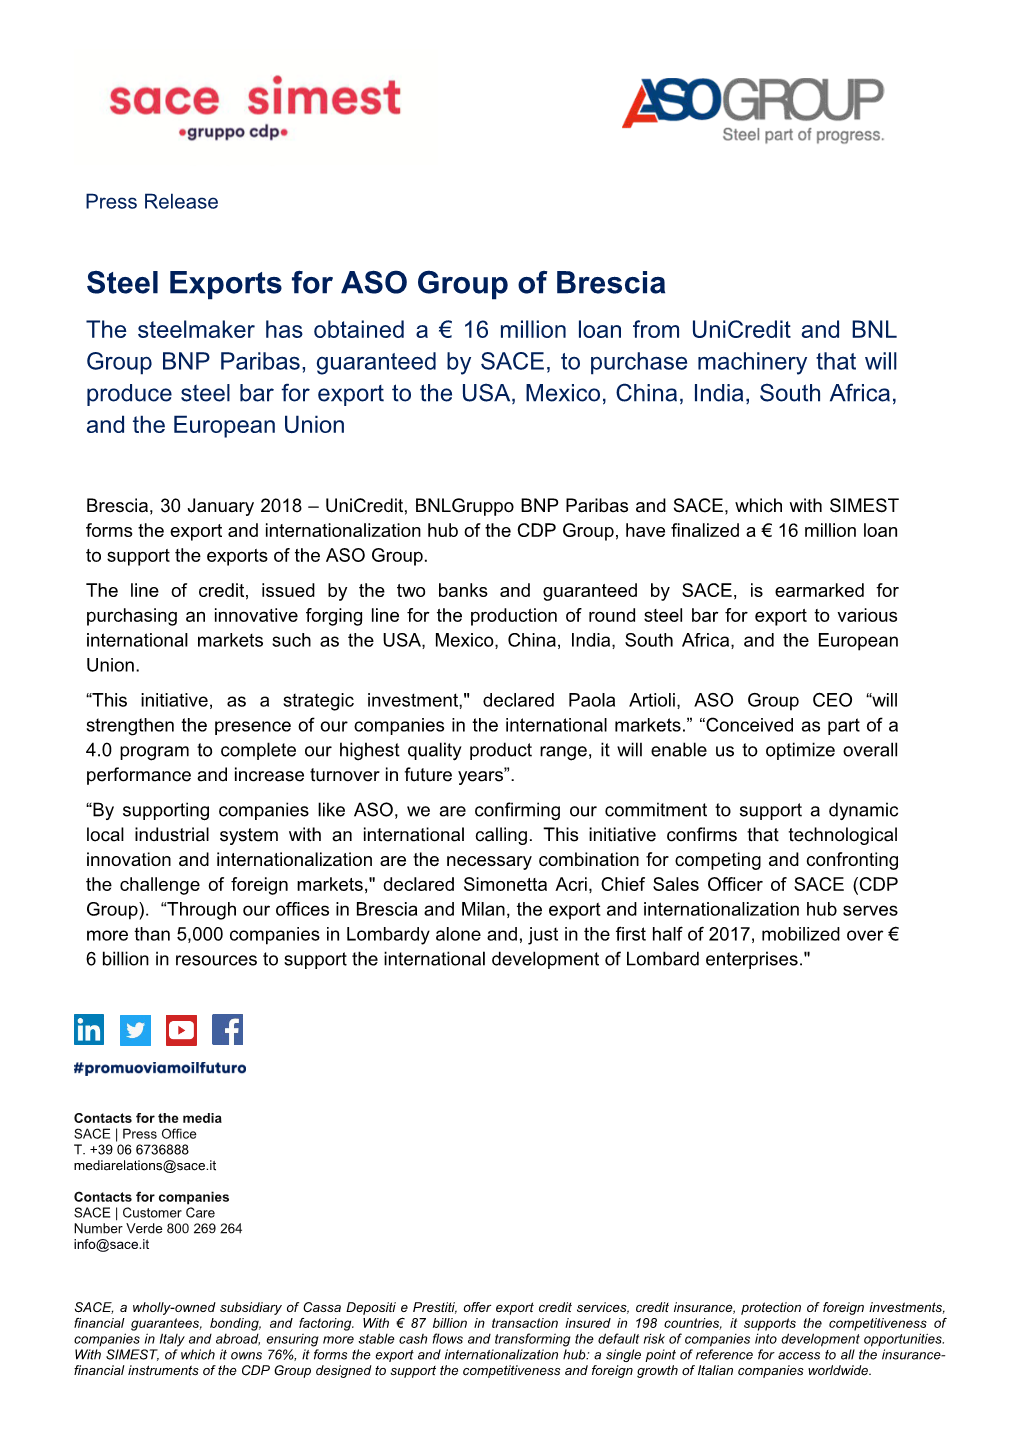 Steel Exports for ASO Group of Brescia